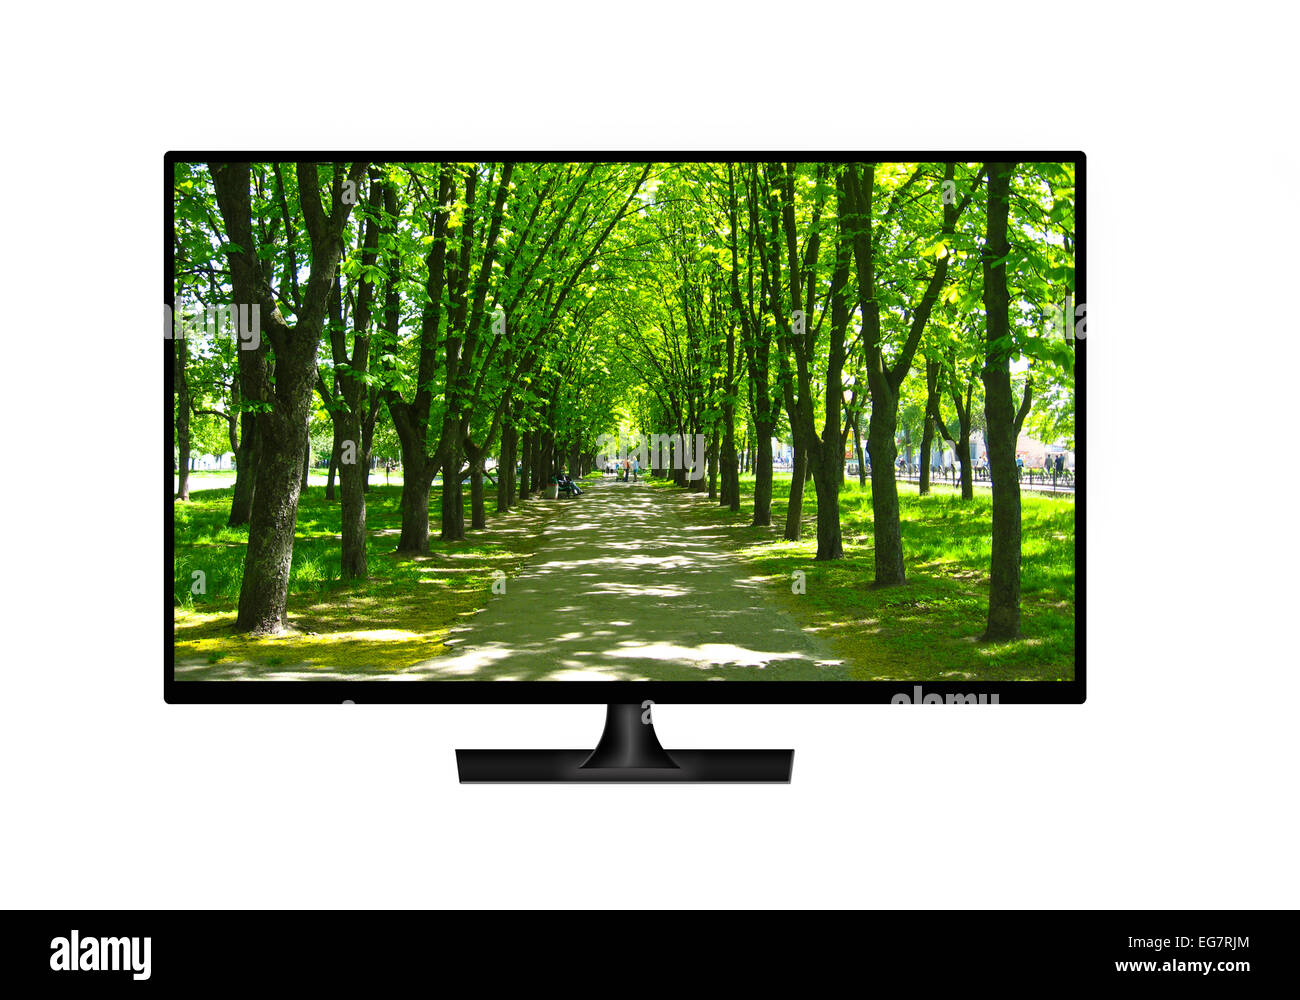 modern television set with image of beautiful park isolated on white background Stock Photo